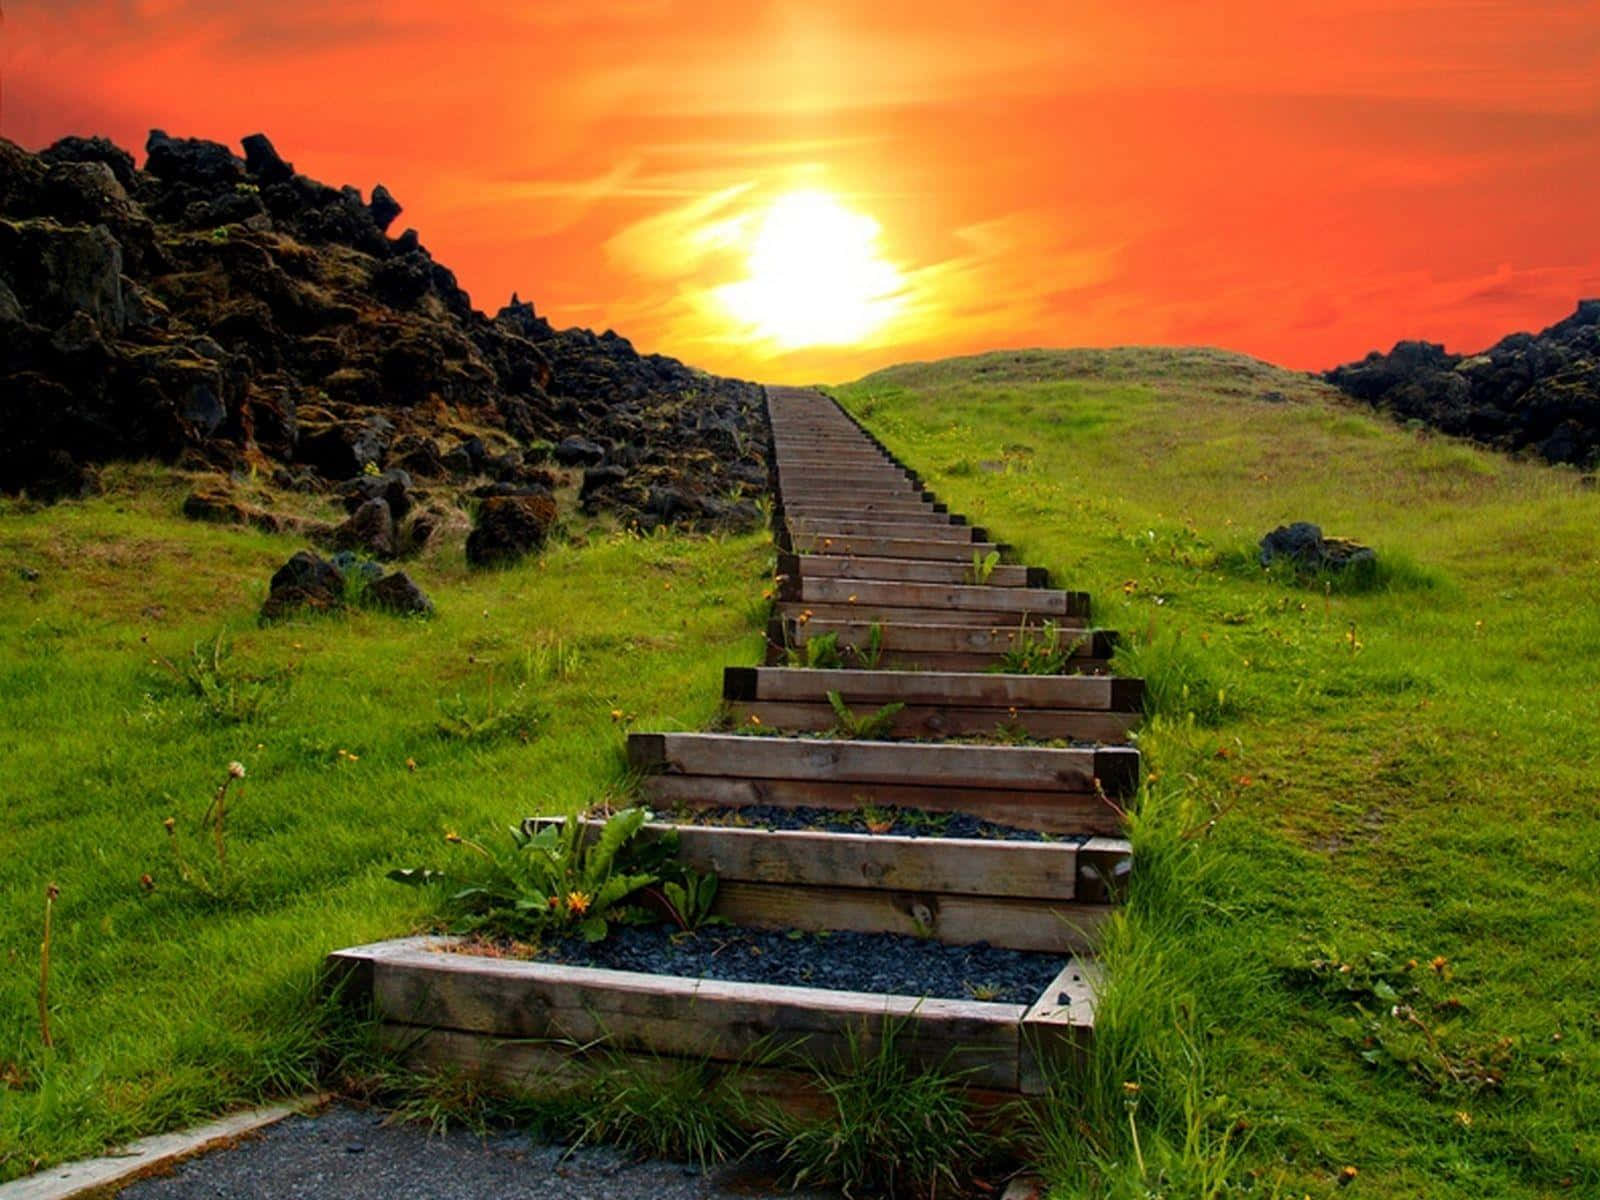 A picturesque stairway leading into the heavenly skies